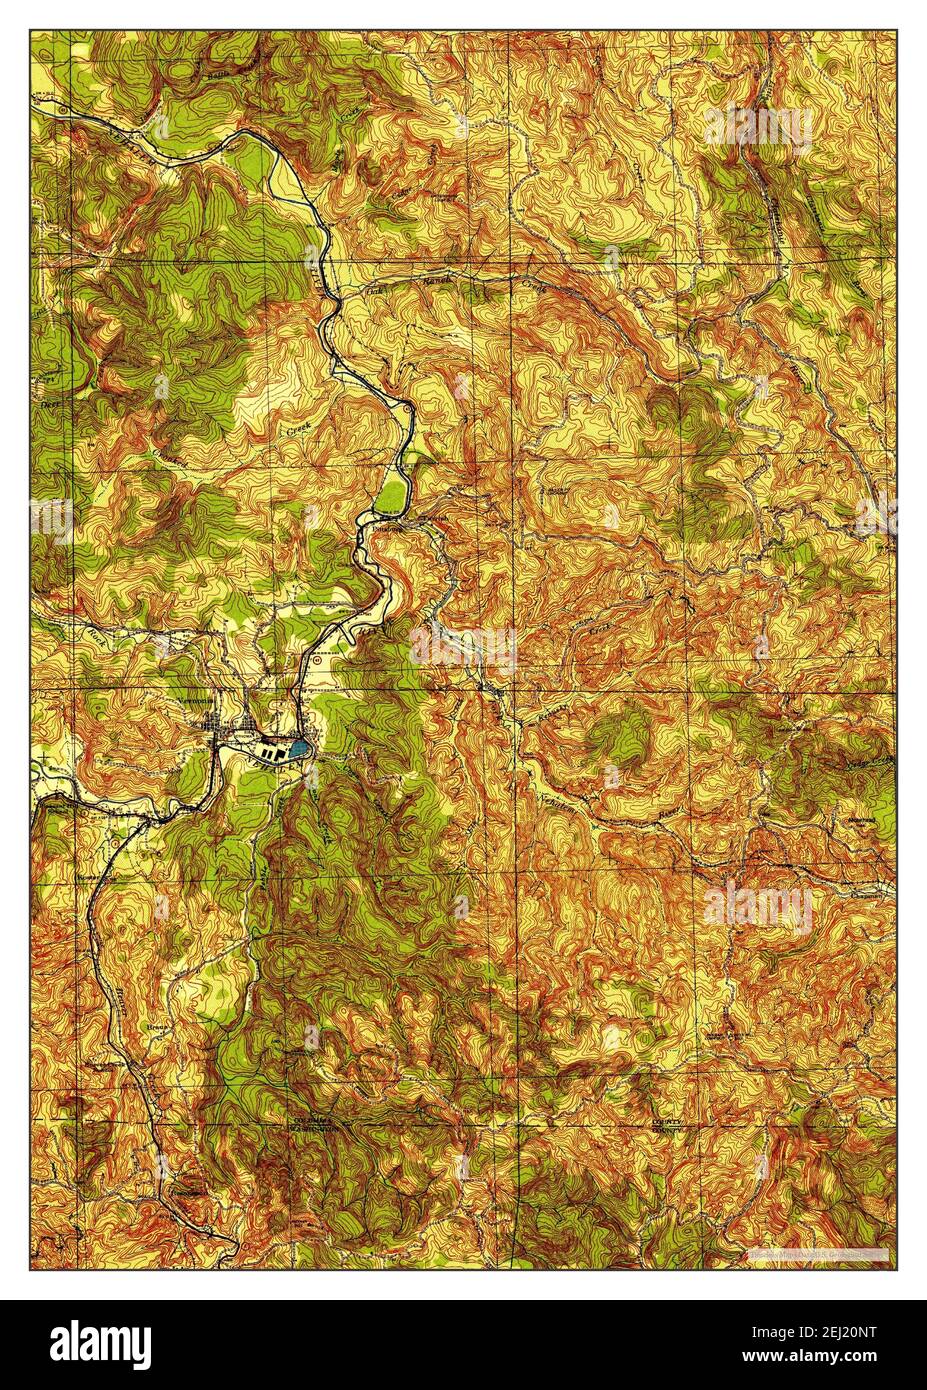 Vernonia, Oregon, map 1940, 1:62500, United States of America by Timeless Maps, data U.S. Geological Survey Stock Photo